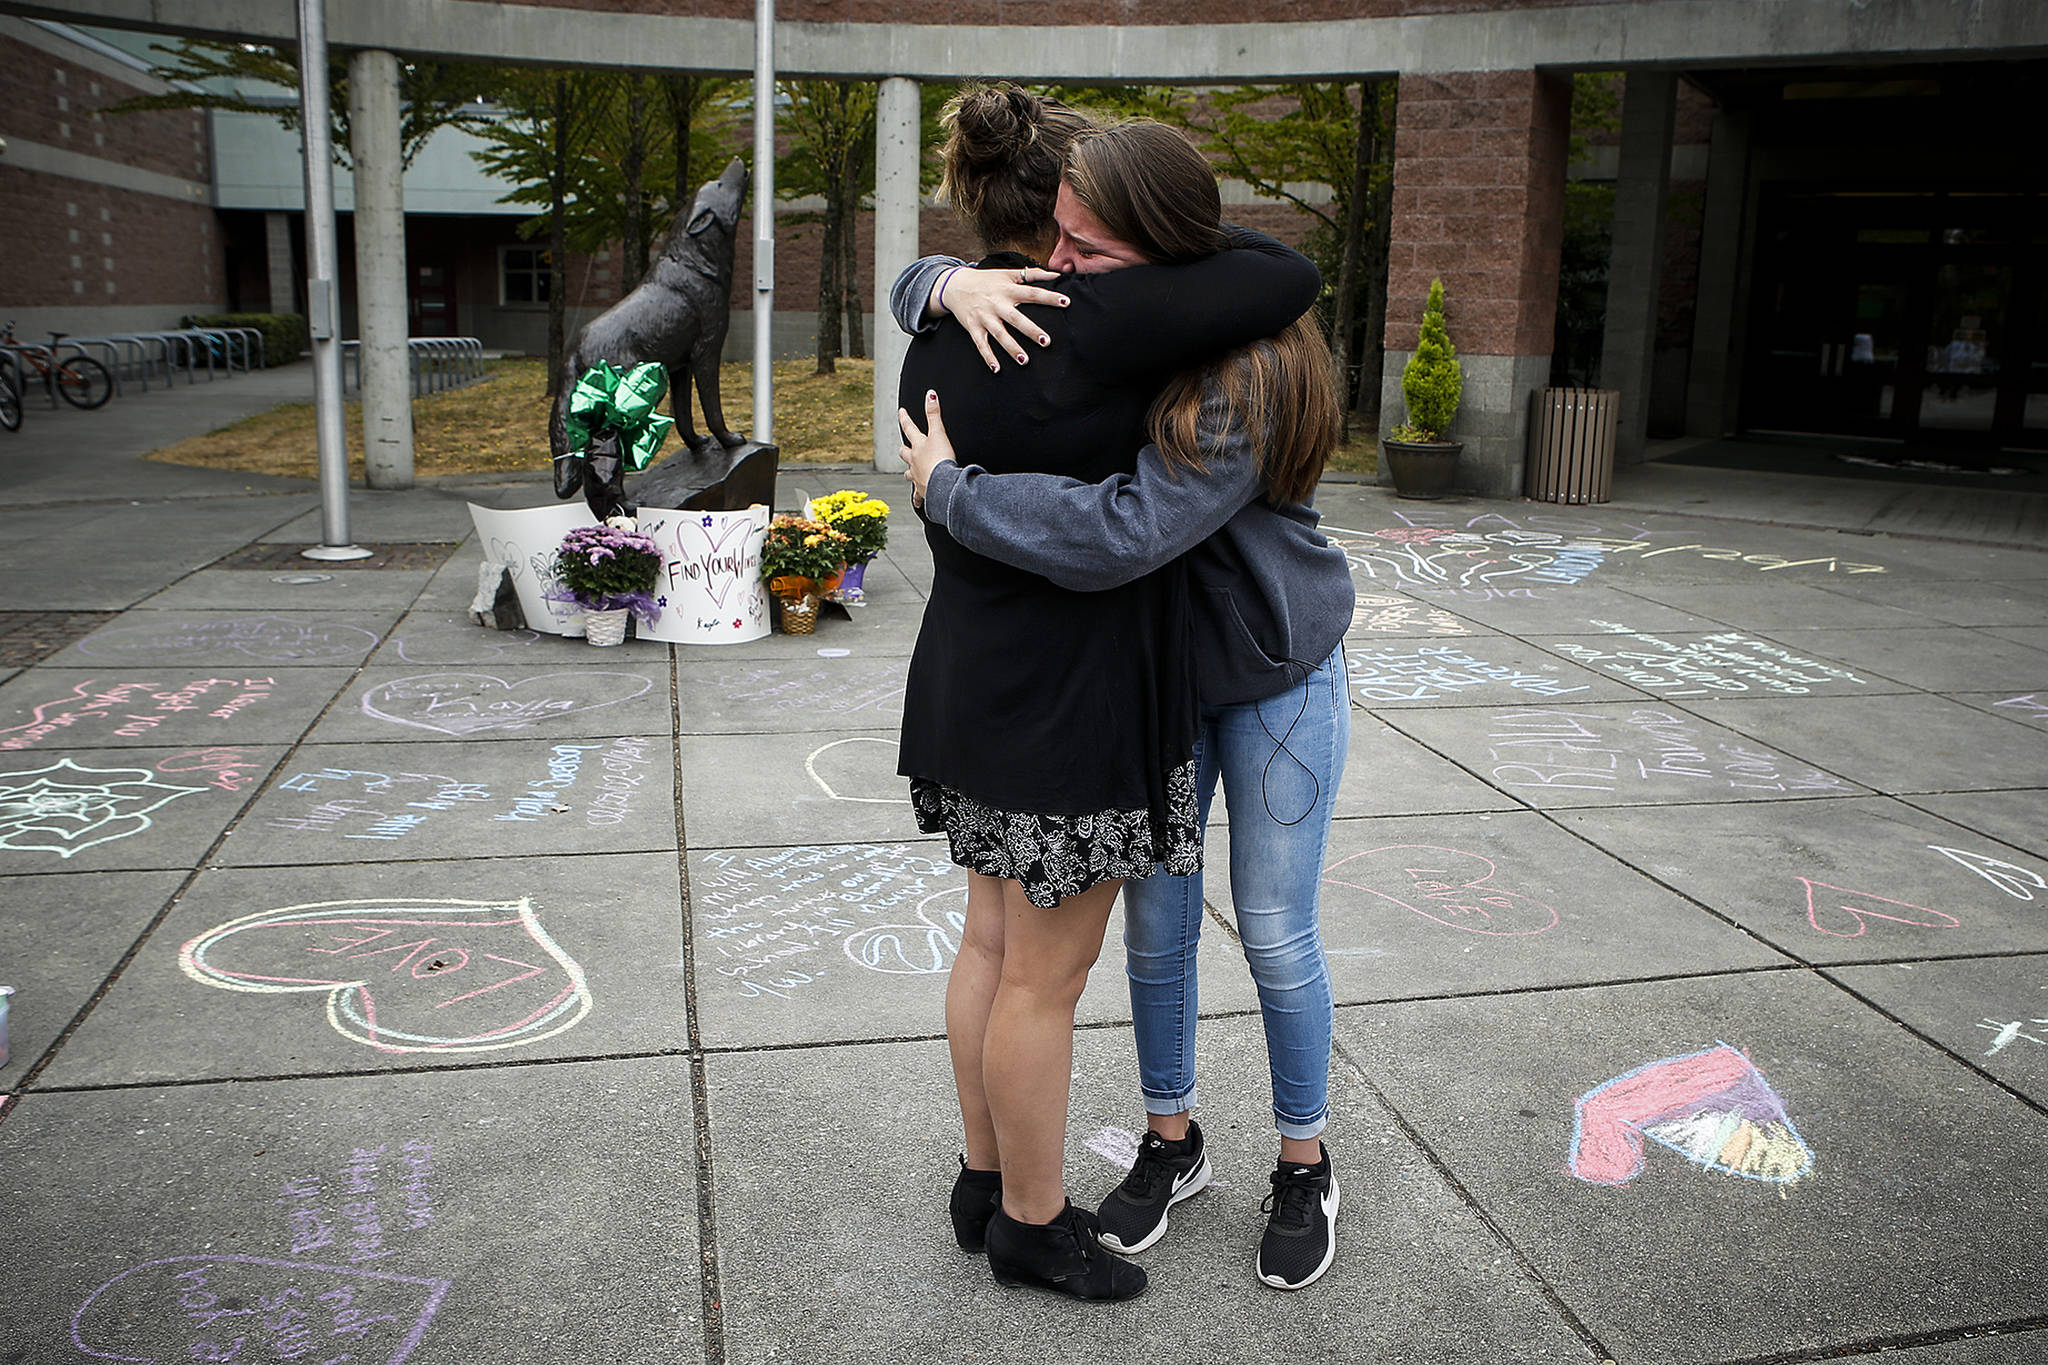 Friends Mariela McNeal (left), 15, and Lauren Crossley, 14, hug near the entrance of Jackson High School where friends and family gathered Thursday to write messages of remembrance for three teens killed in a car crash in Lynnwood early Wednesday. All three who were killed were students at Jackson High School. (Ian Terry / The Herald)